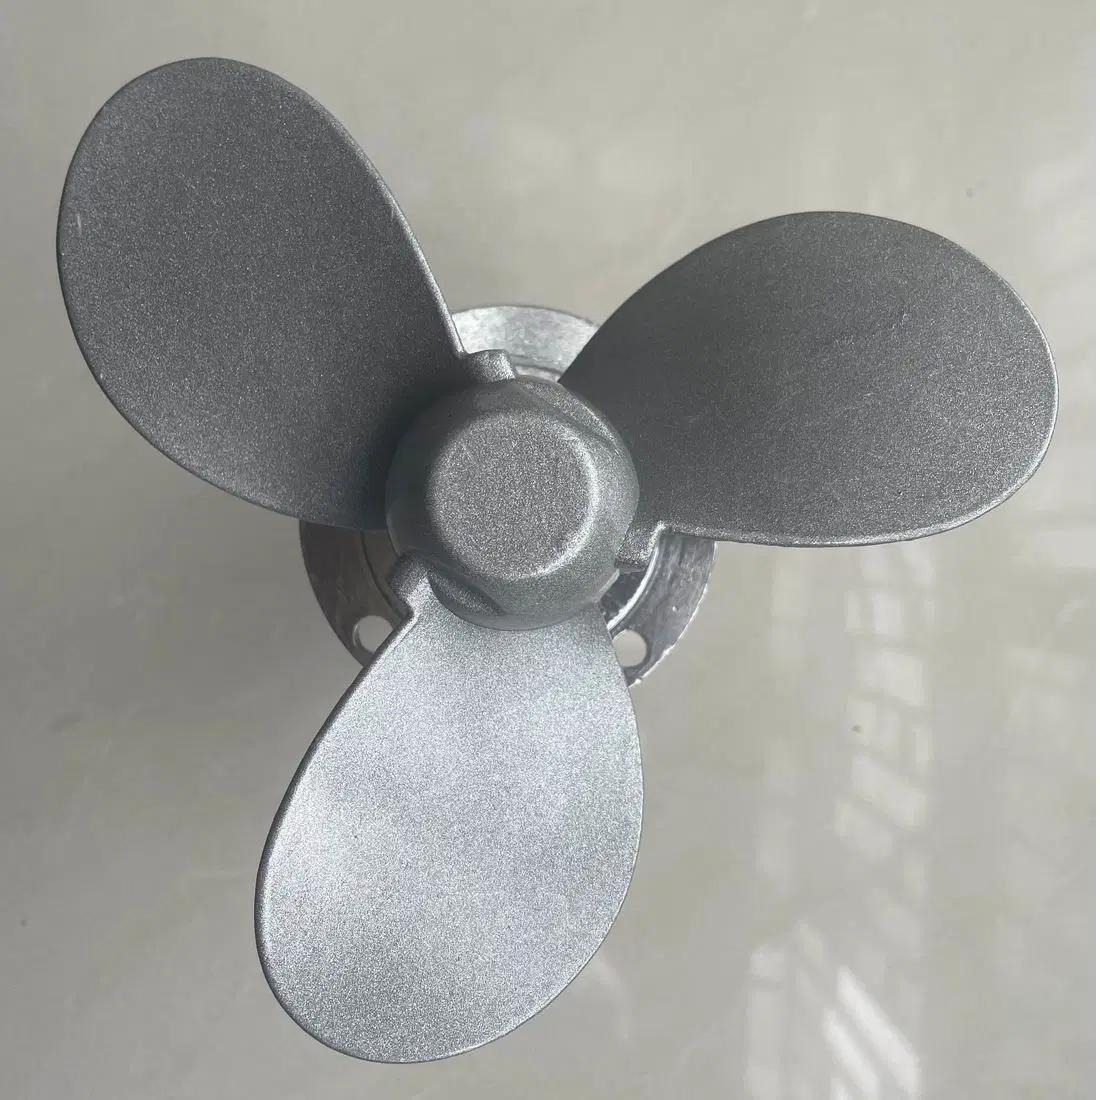 Small Boat Propeller, Brush Cutter Convert Into Outboard Motor, Thruster, Marine Propeller, Modification Parts